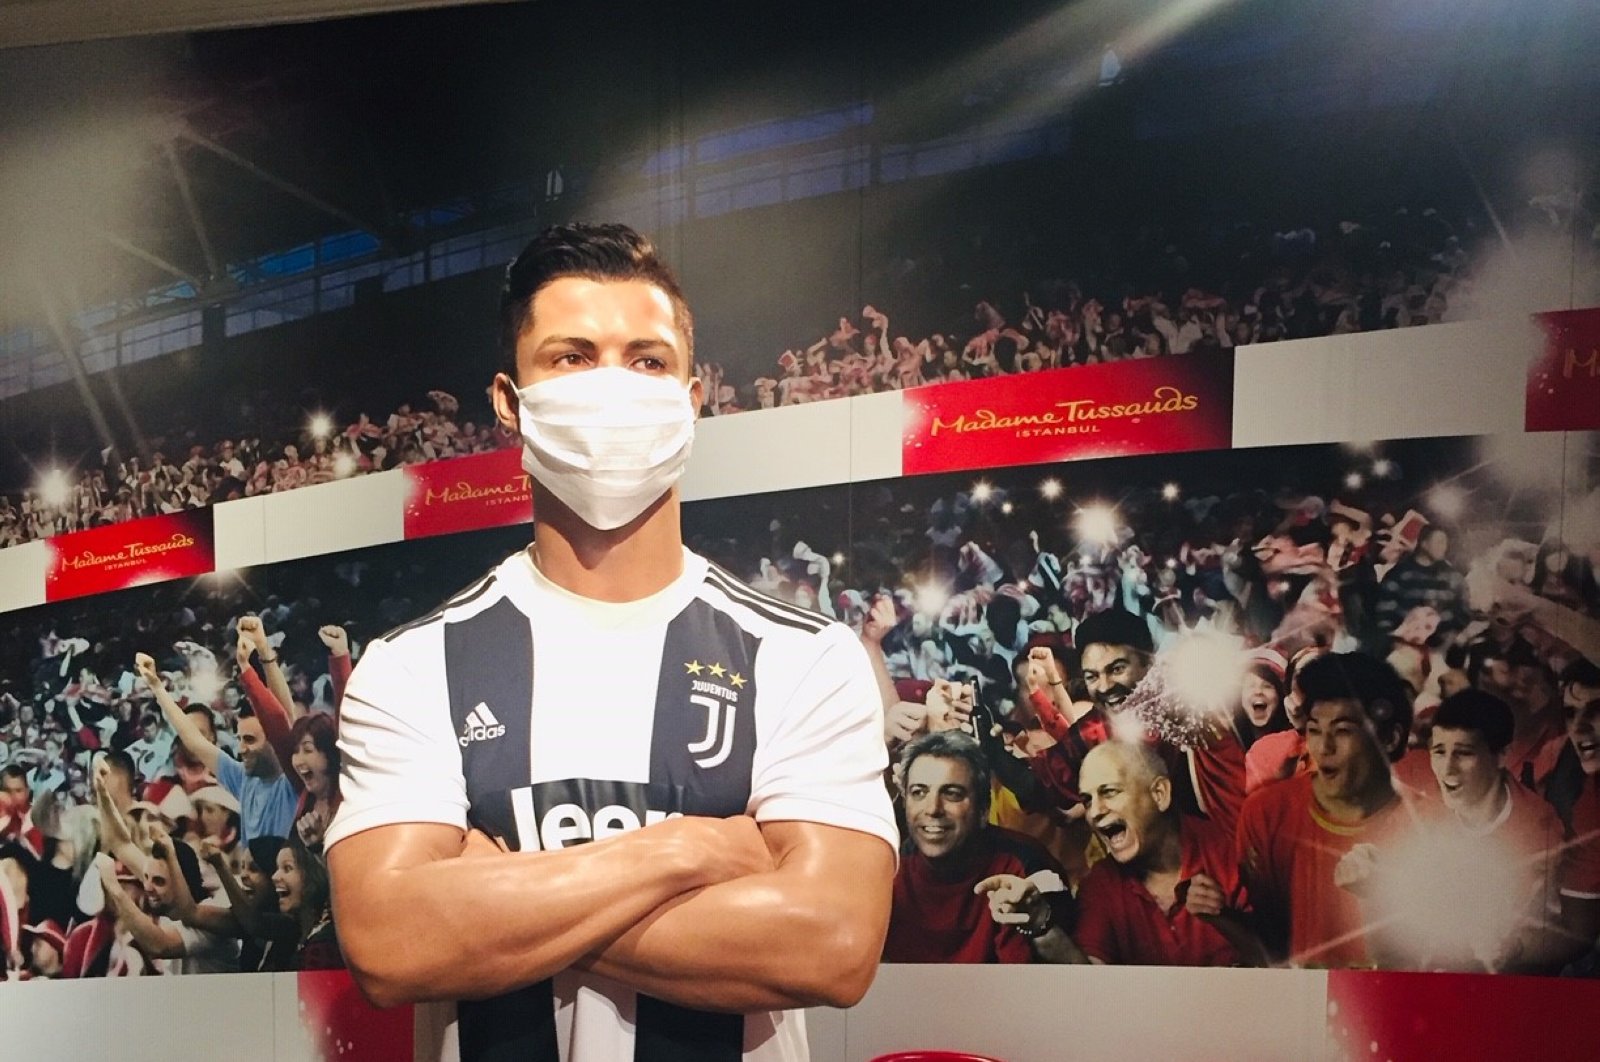 Cristiano Ronaldo's wax figure is seen wearing a mask in this photo in Istanbul, Turkey, July 8, 2020. (AA Photo)